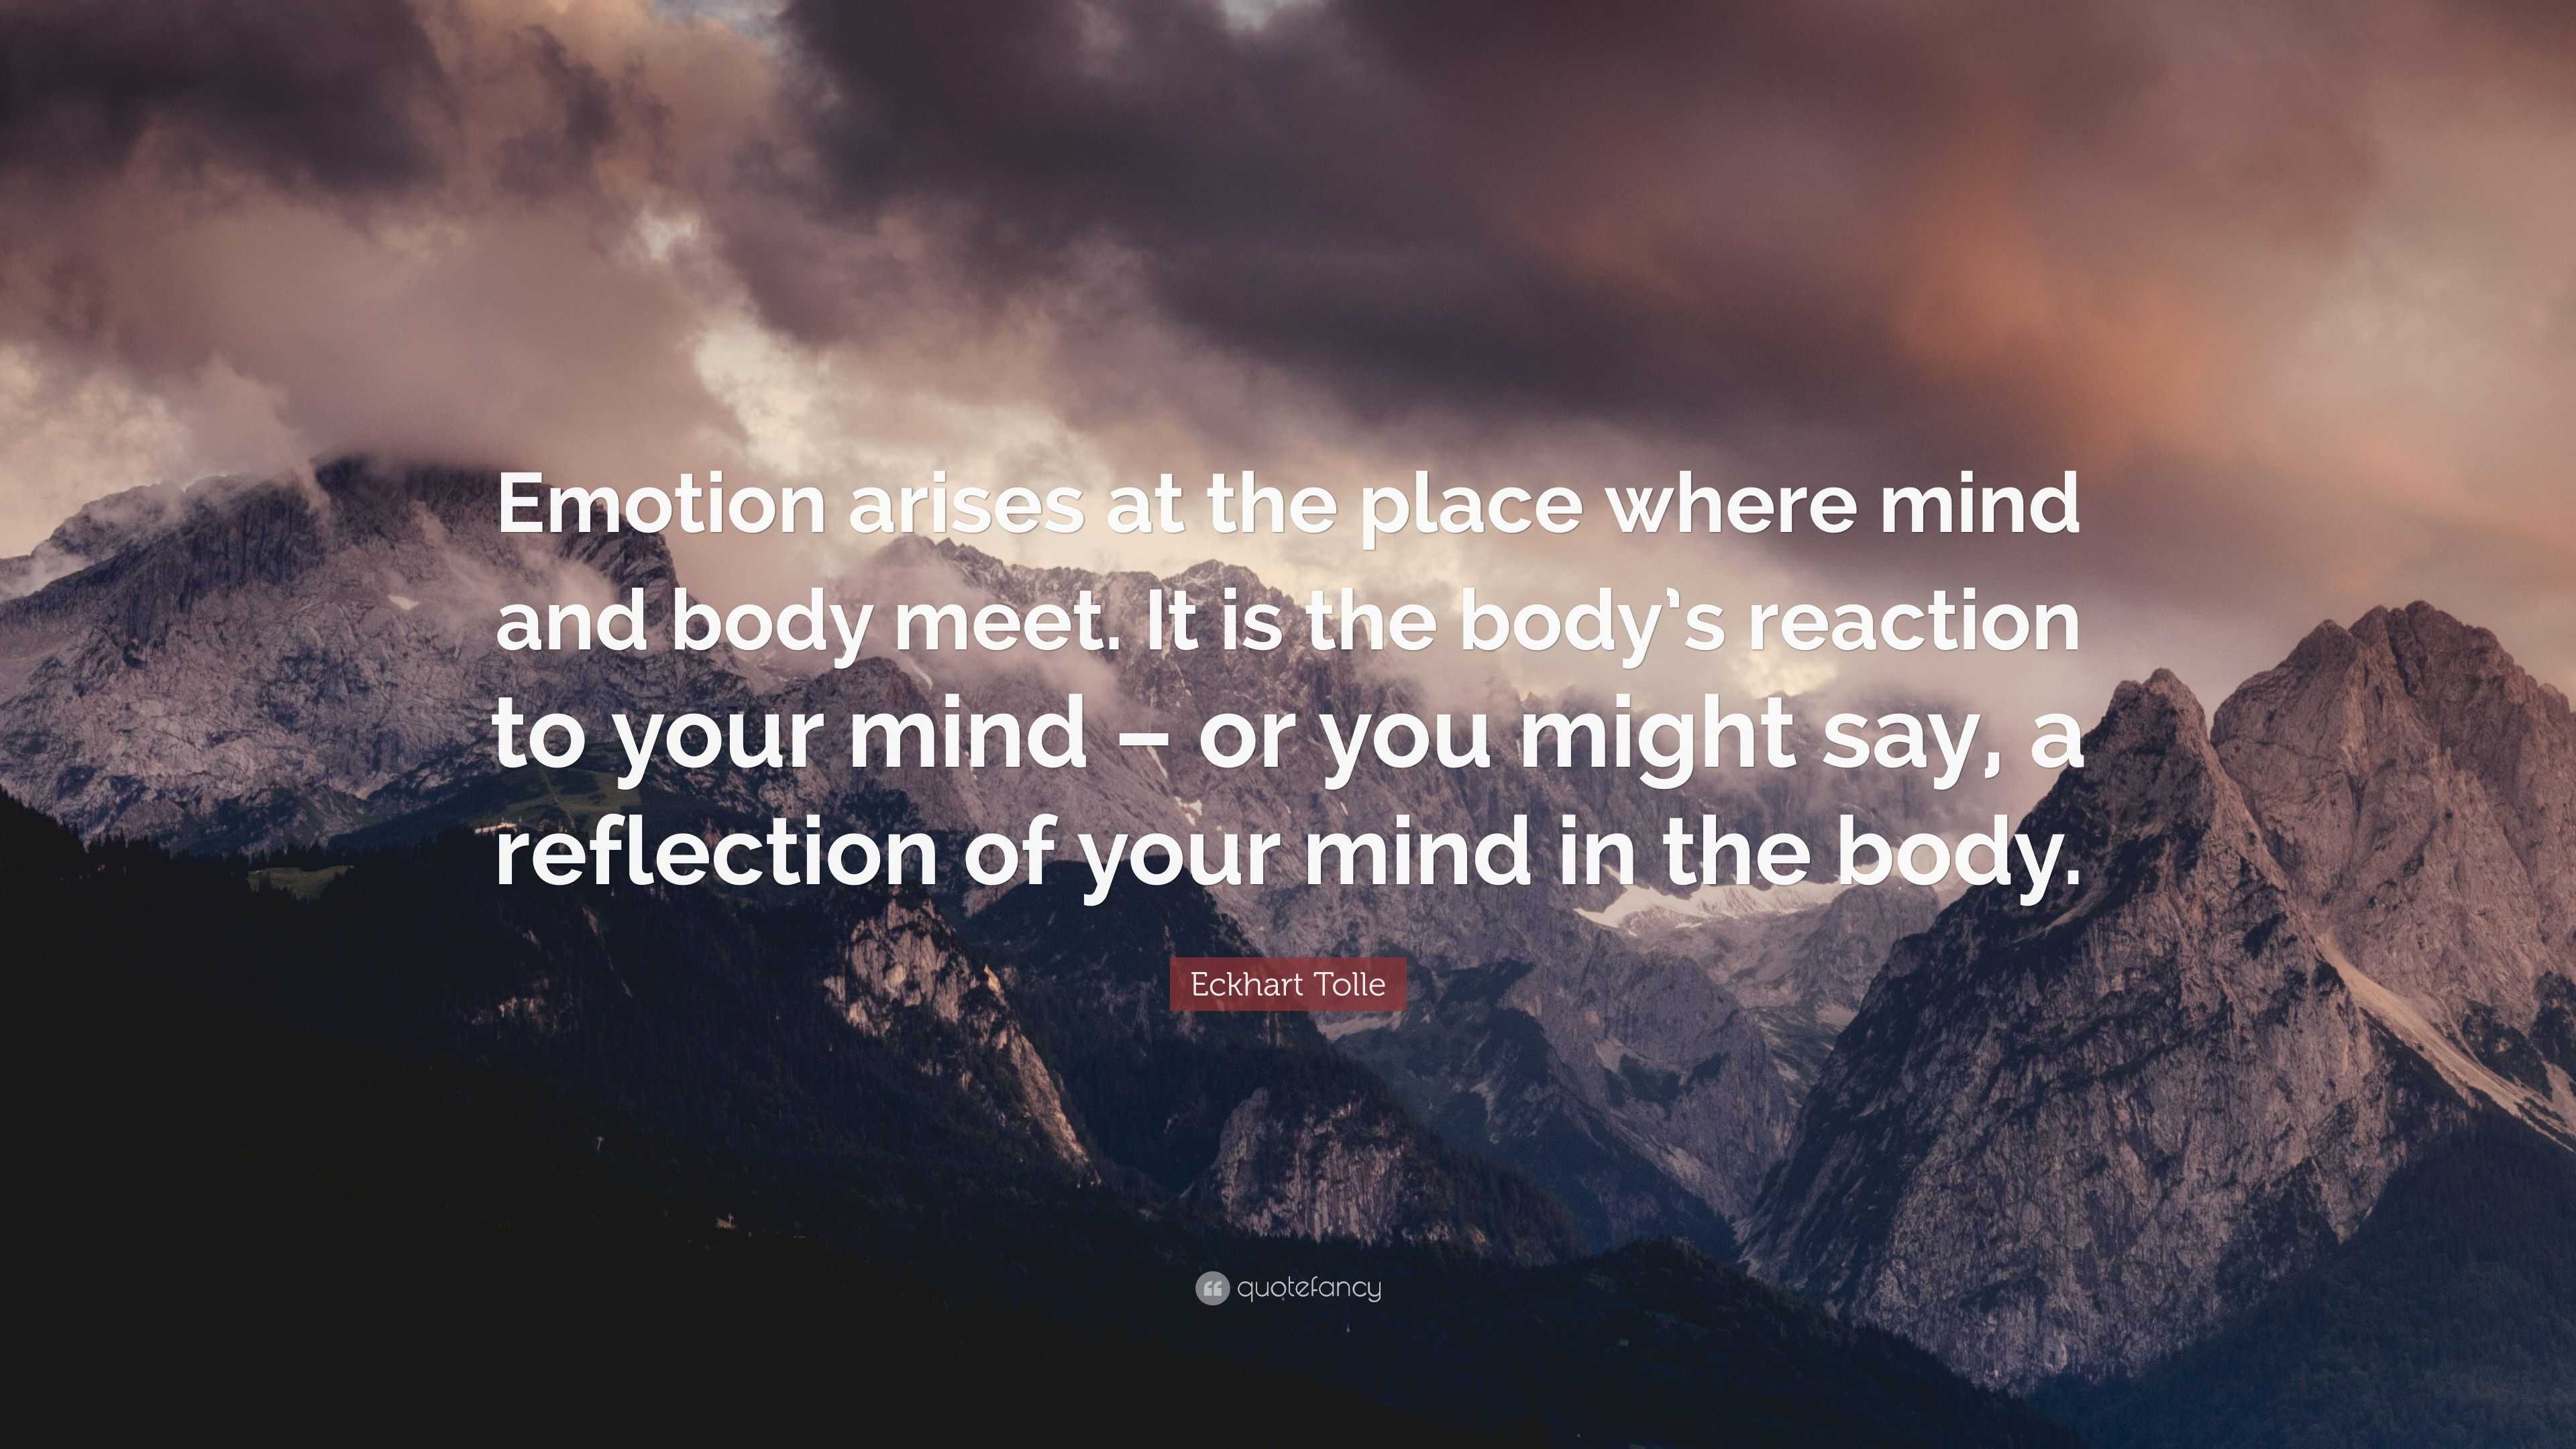 Eckhart Tolle Quote: “Emotion arises at the place where mind and body ...